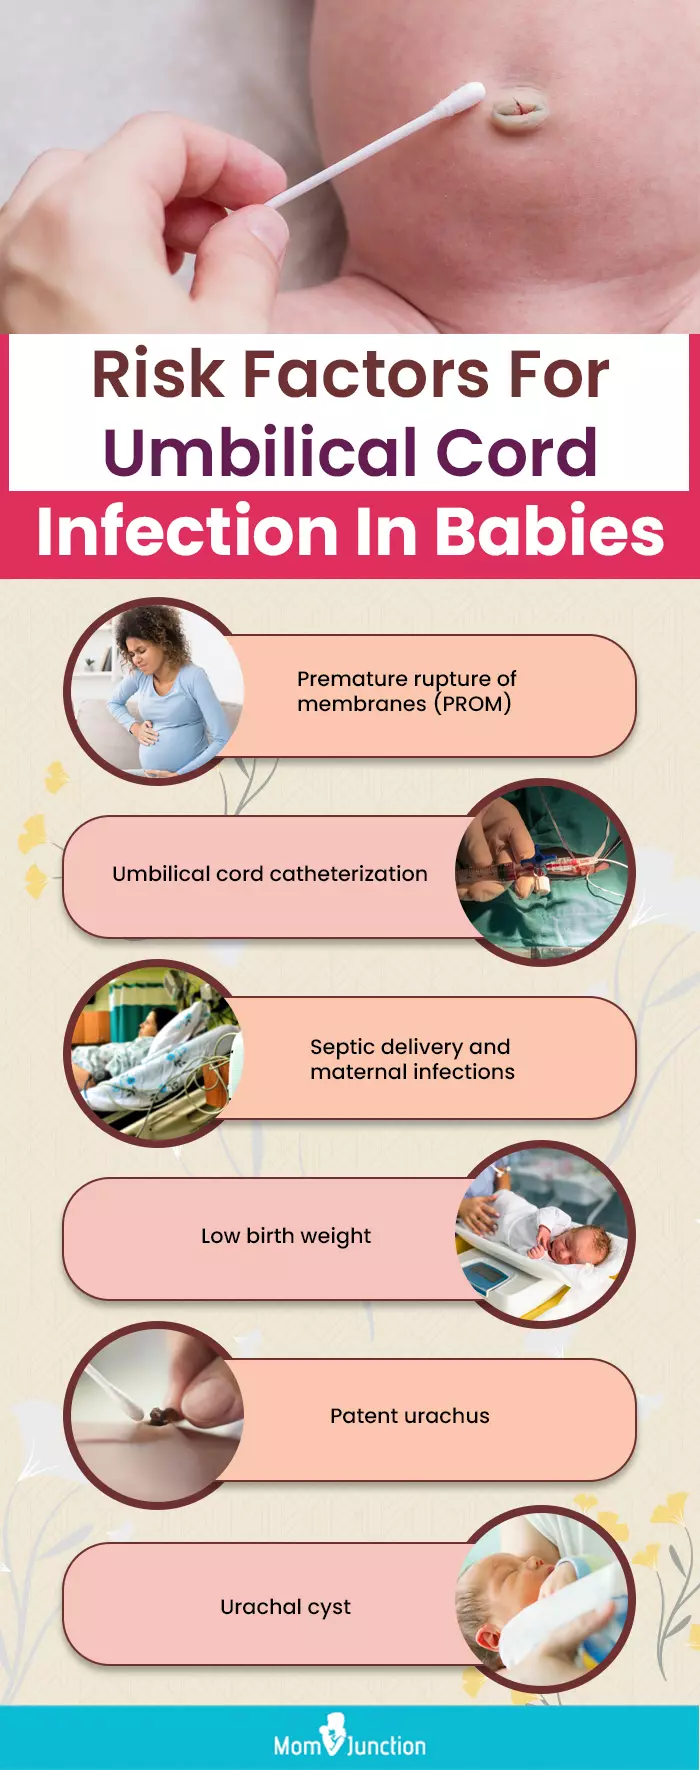 risk factors for umbilical cord infection in babies (infographic)